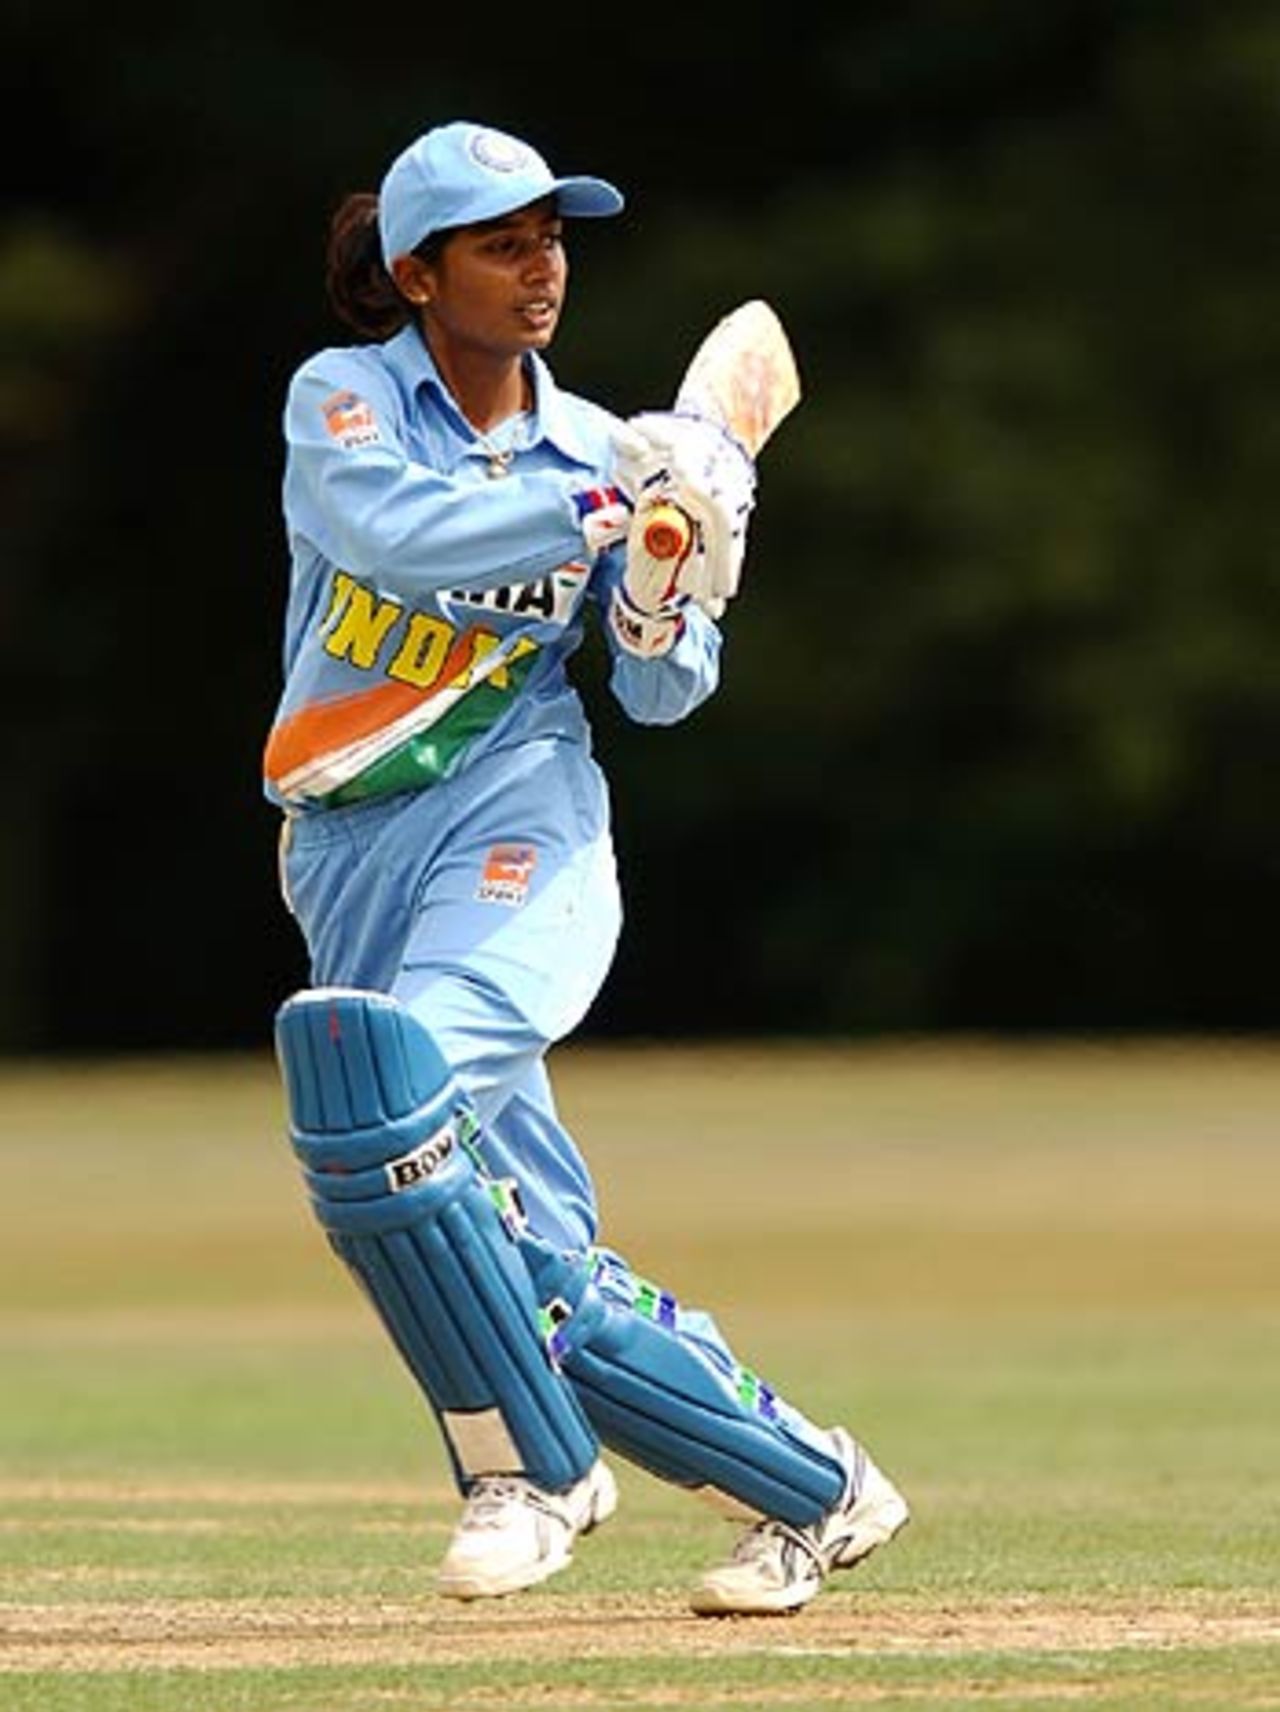 Mithali Raj swings one to the on side during her knock of 73, England Women v India Women, 3rd ODI , Arundel, August 19, 2006